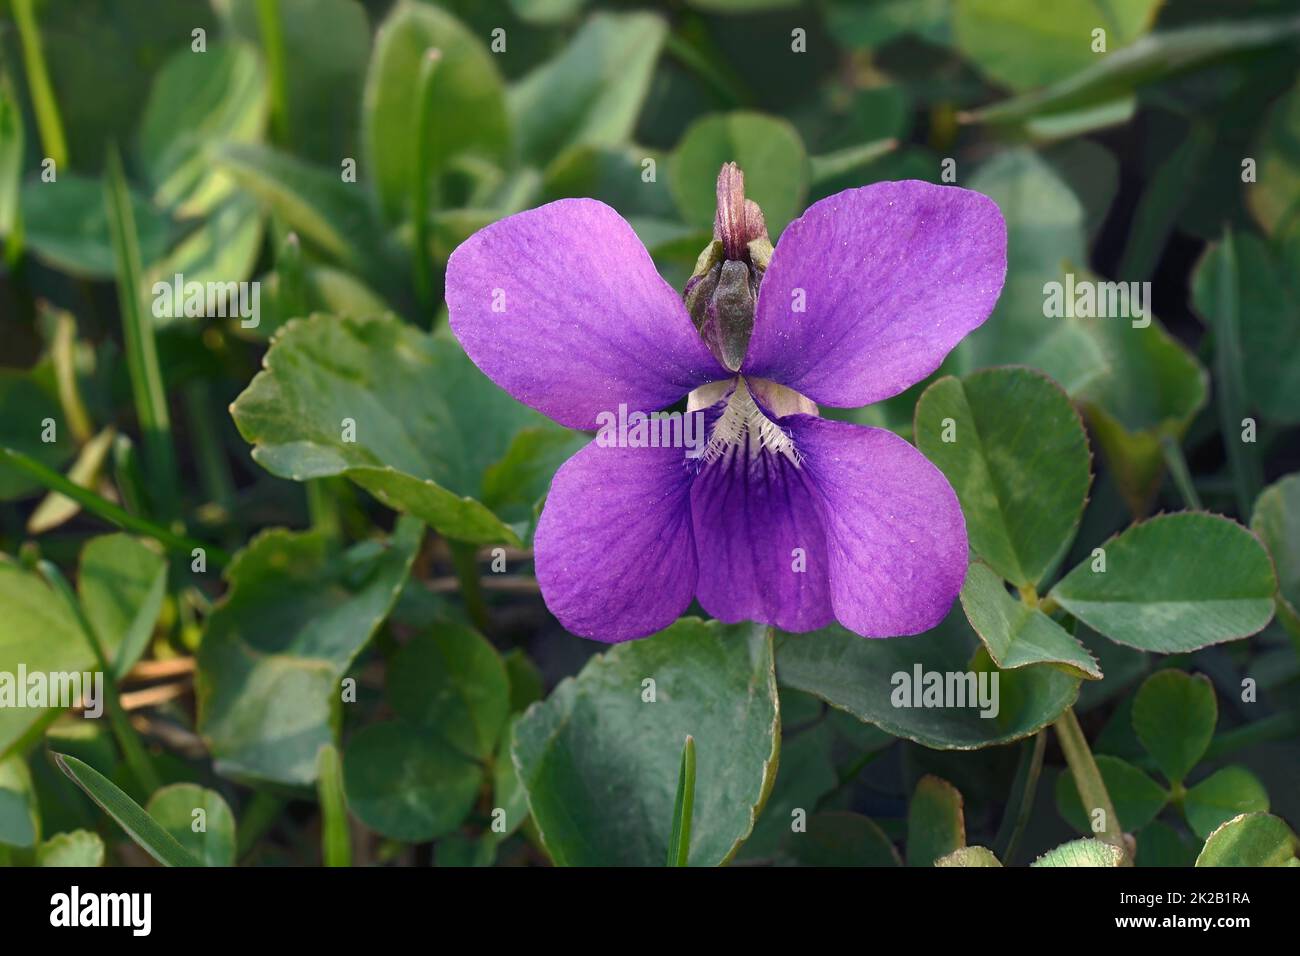 Close-up image of Common blue violet flower Stock Photo